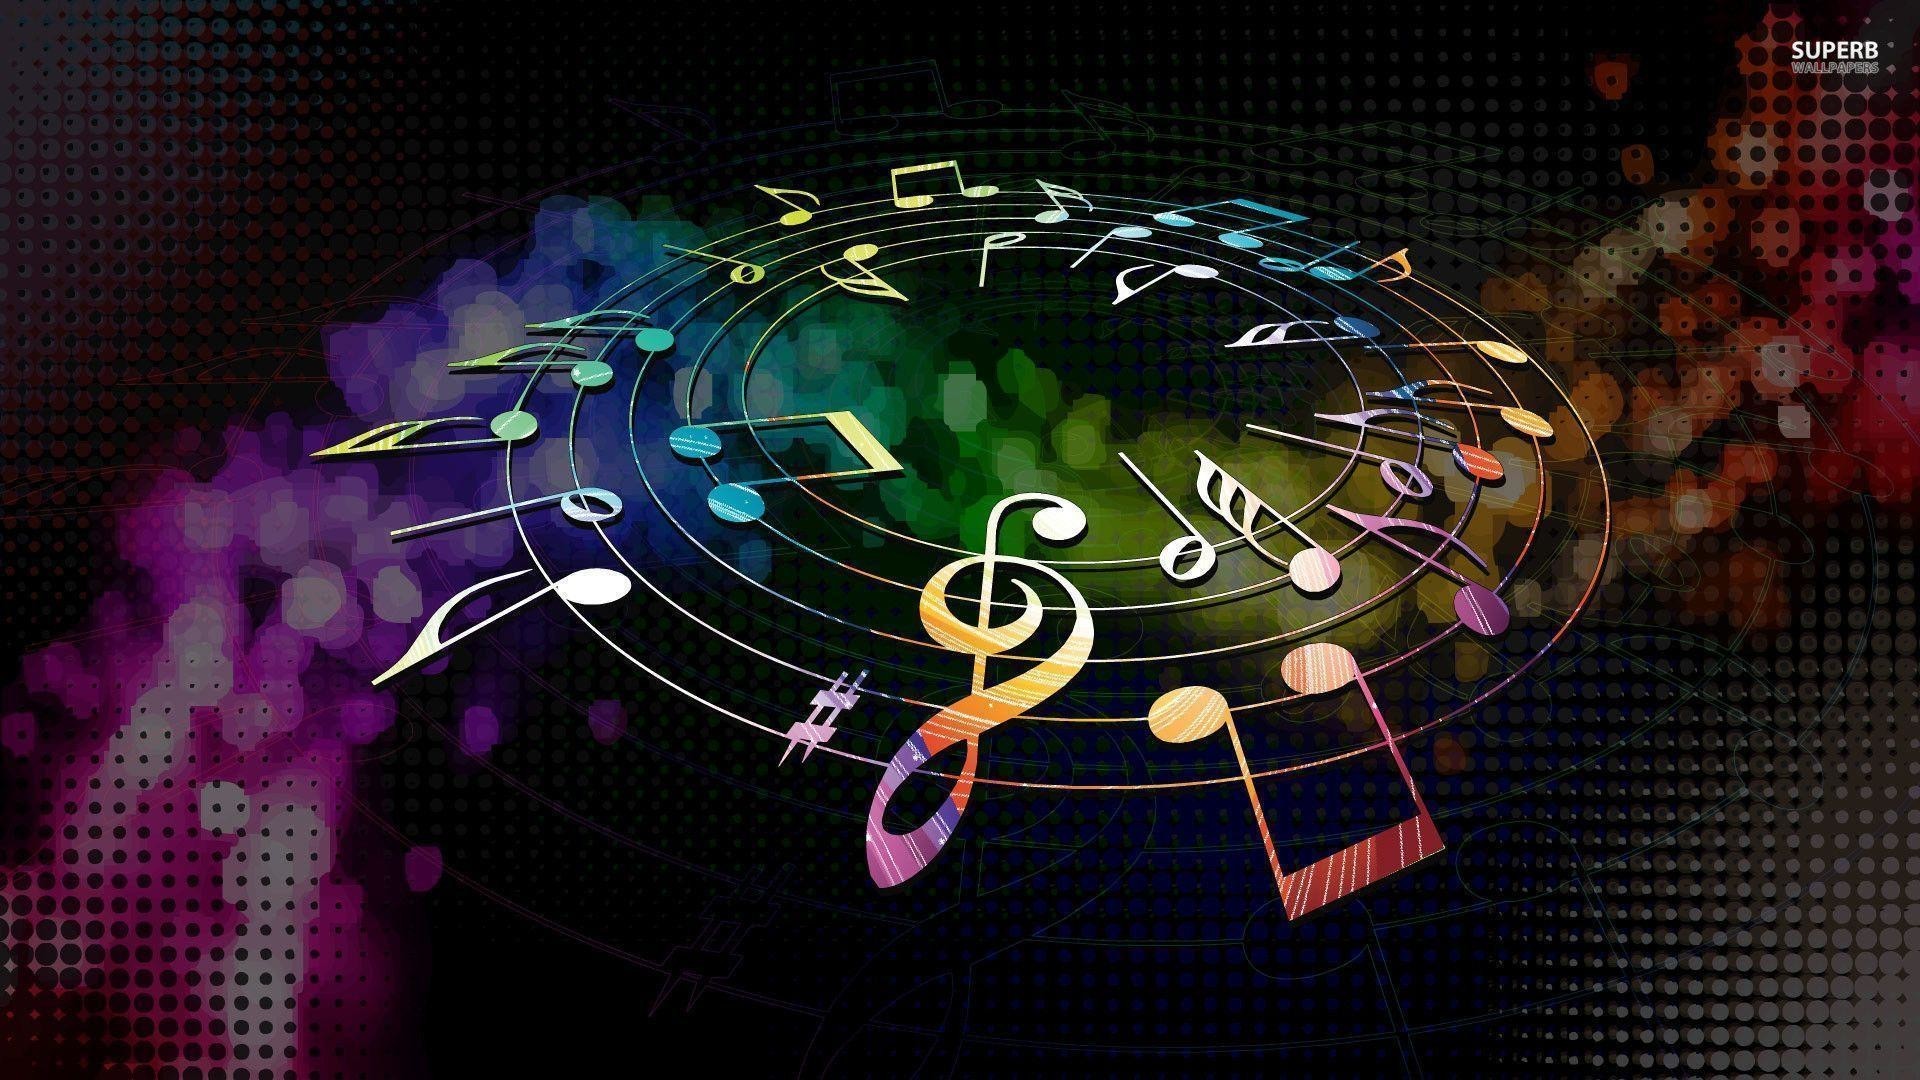 1920x1080  Colorful musical notes wallpaper - Music wallpapers - #